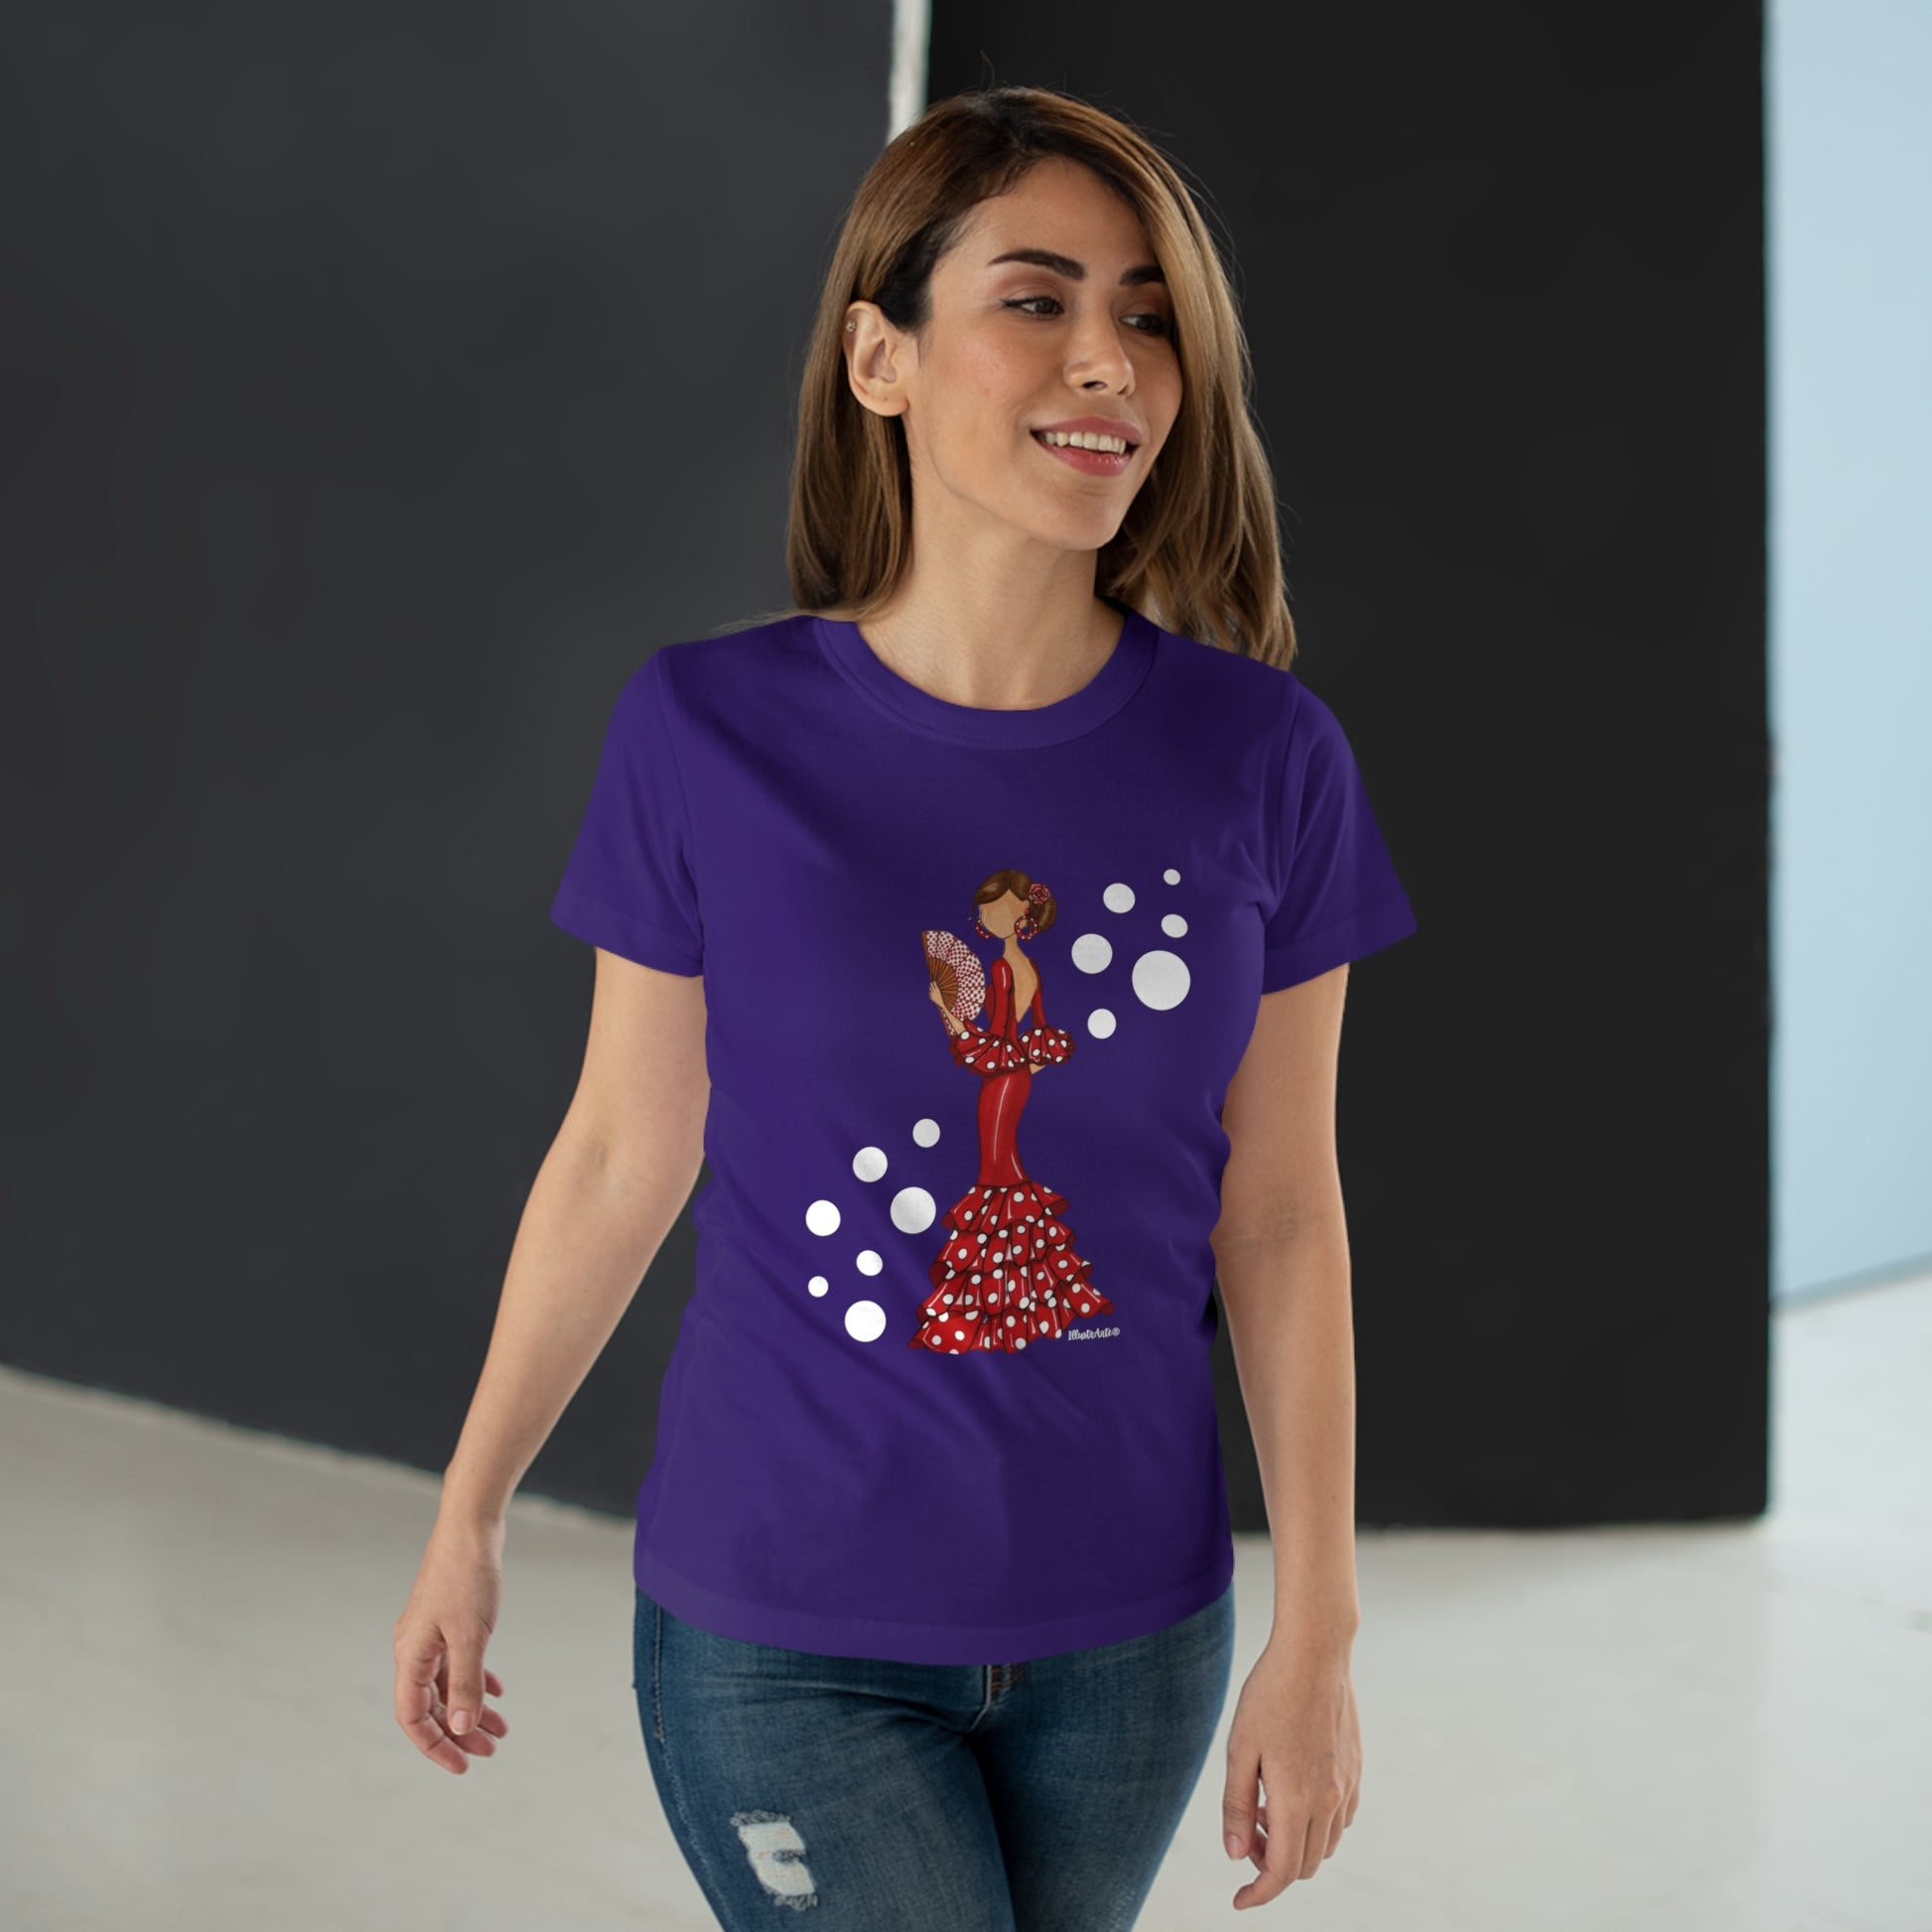 a woman wearing a purple t - shirt with a picture of a woman on it